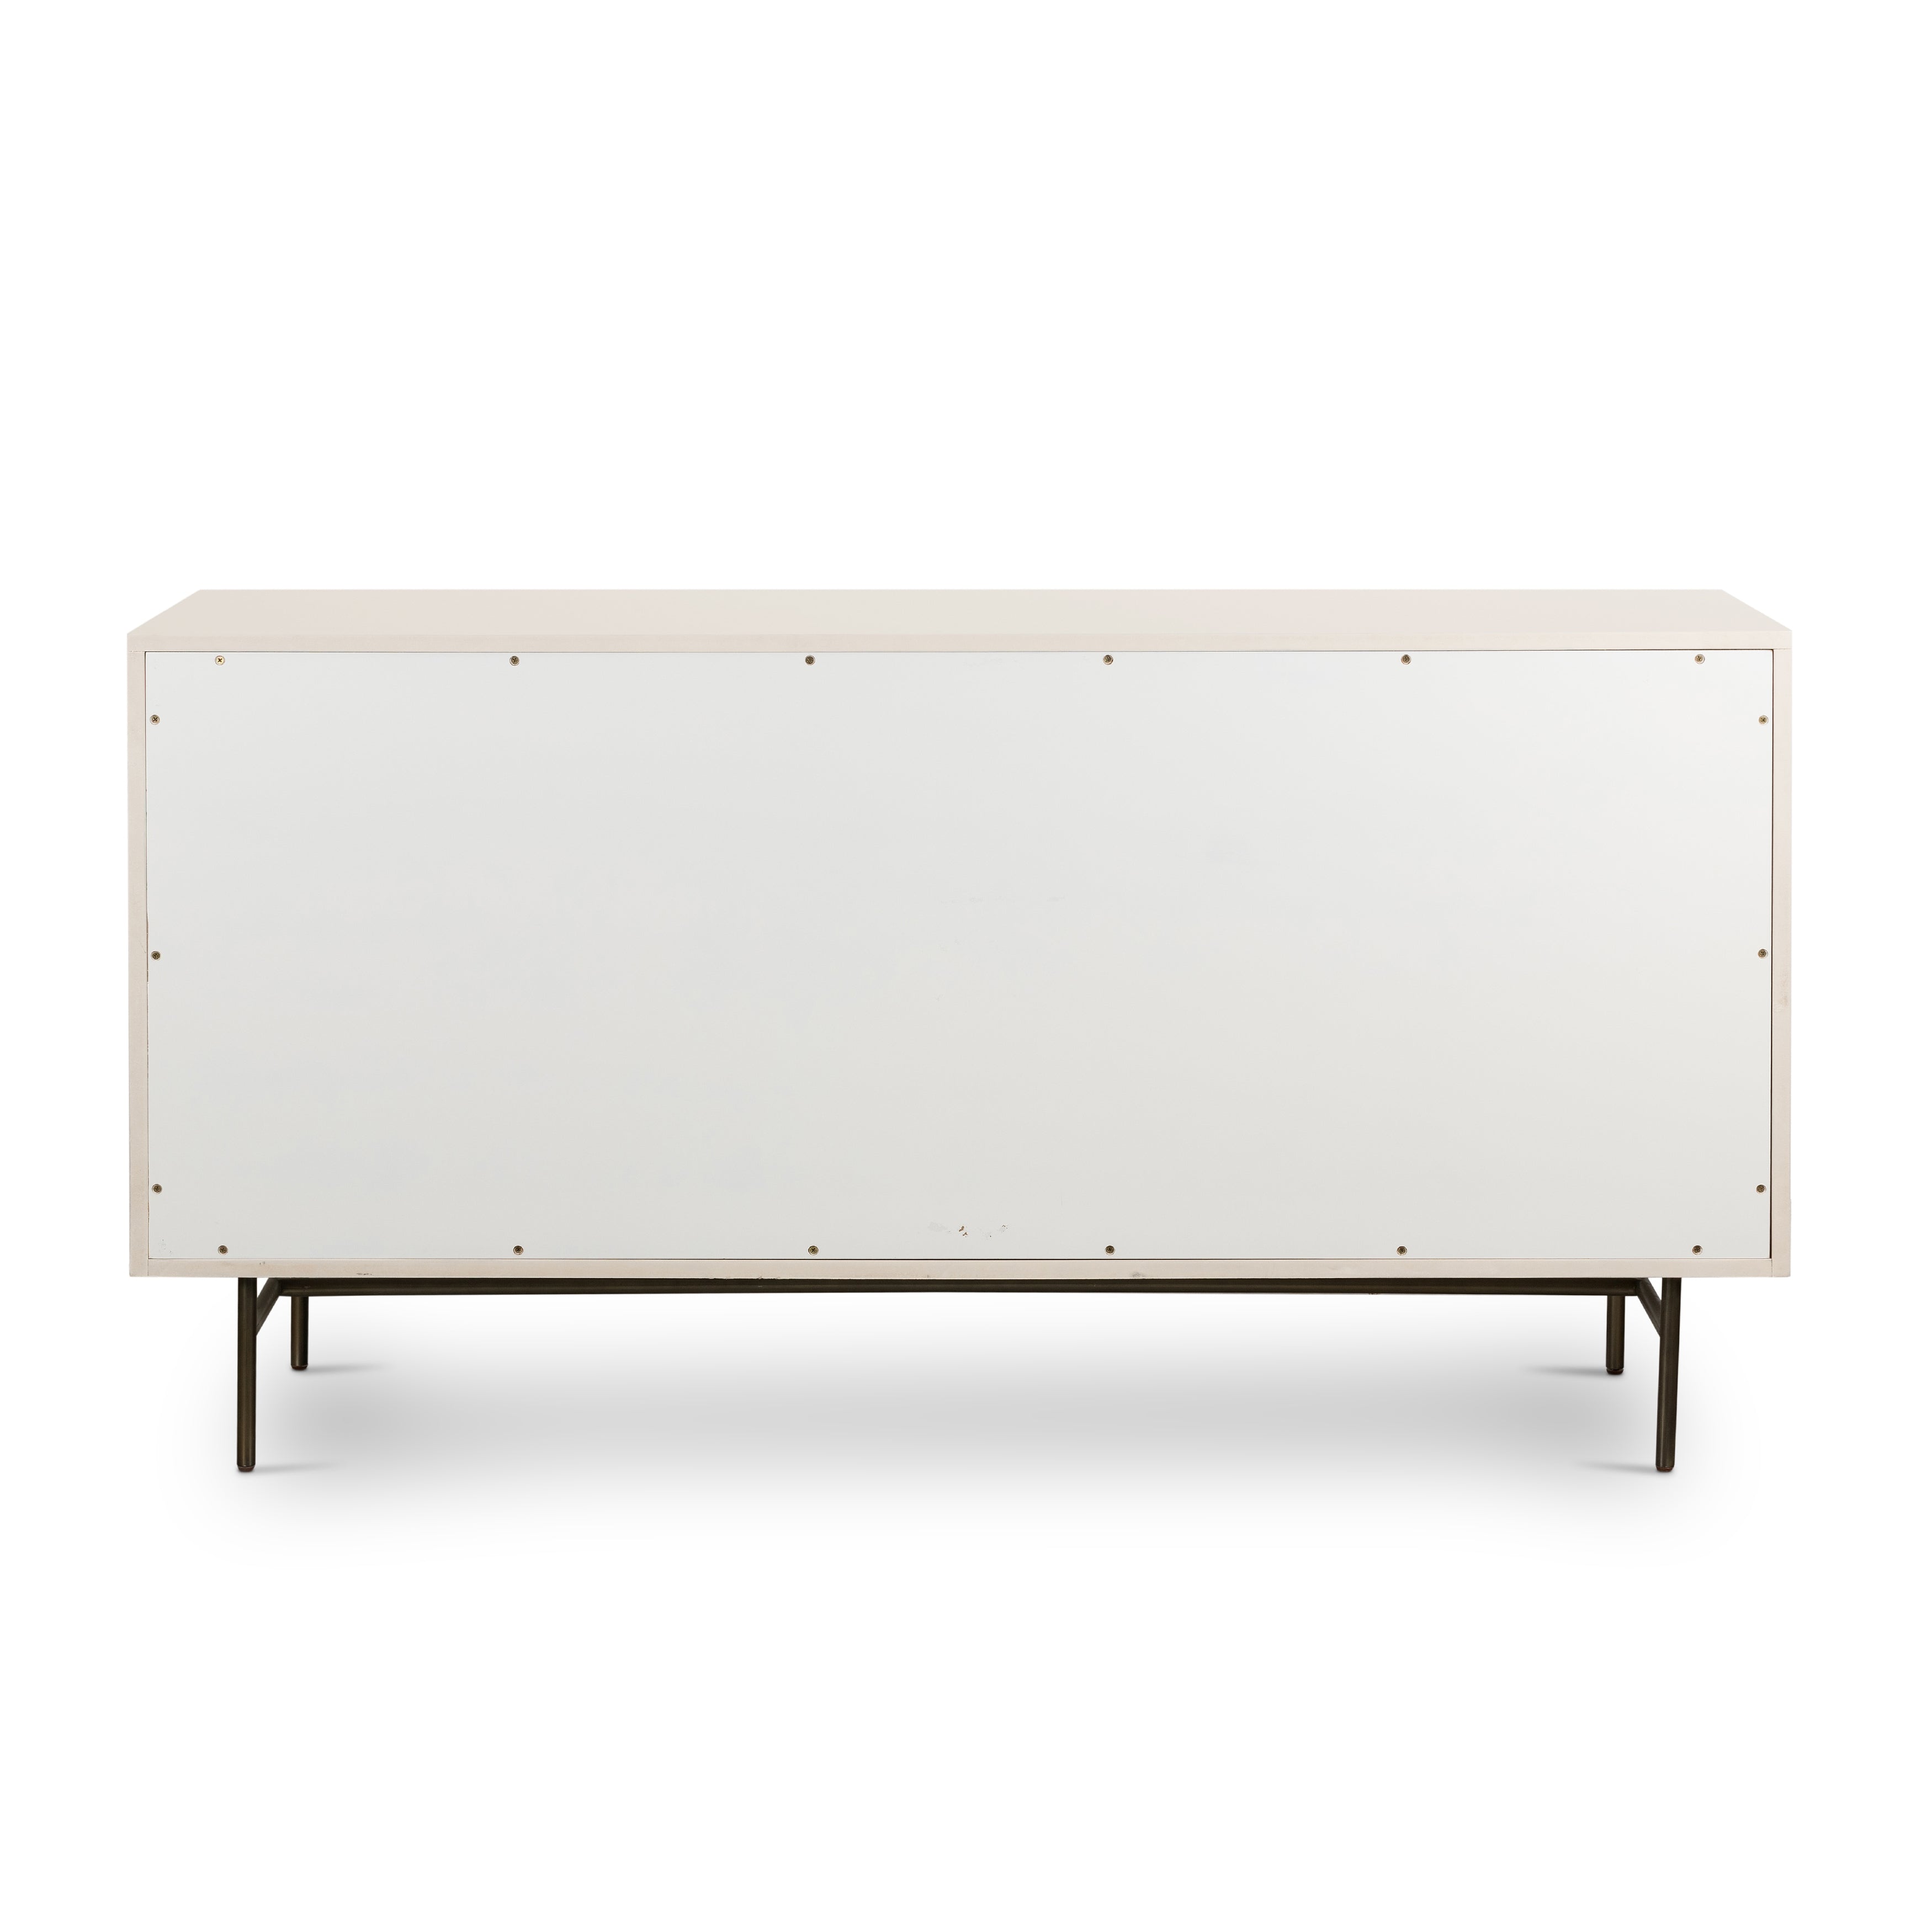 Bring a light look to bedroom styling with this Luella 6 Drawer Dresser - Matte Alabaster. A lacquered six-drawer dresser features woven cane panels and half-moon hardware finished in an aged brass for a beautiful + functional dresser in any bedroom!  Overall Dimensions: 64.00"w x 19.00"d x 33.50"h